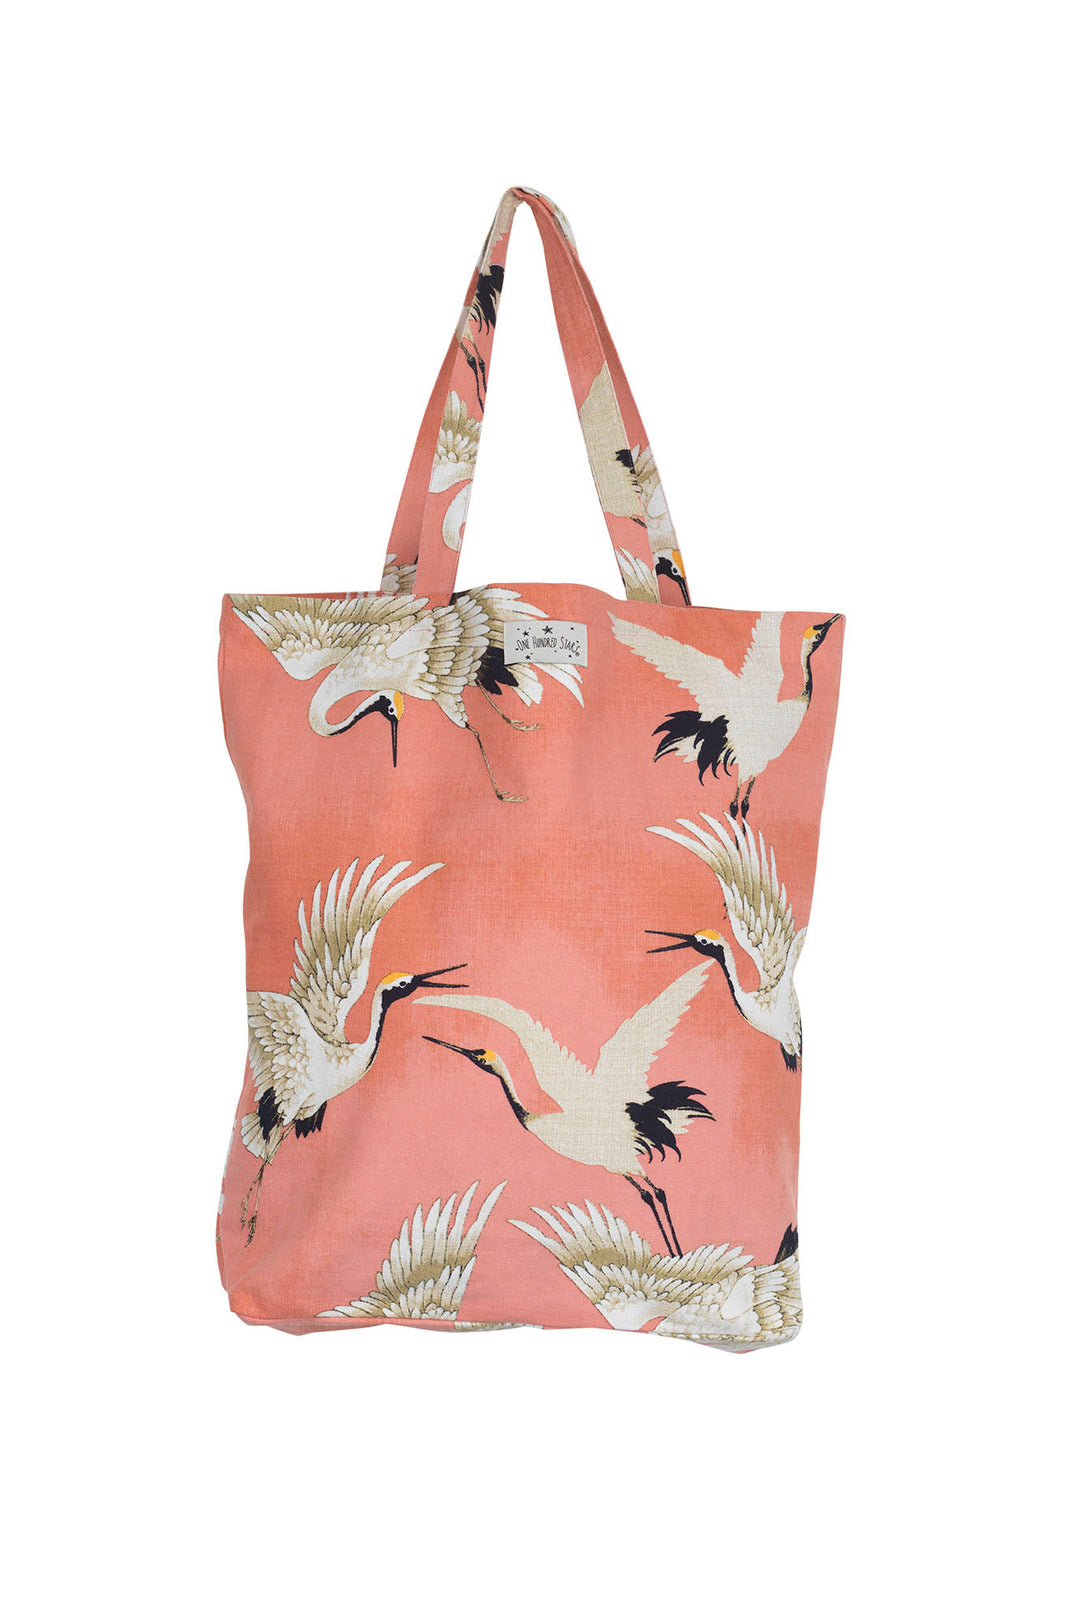 This One Hundred Stars Stork Crane Lipstick Pink Bag is made from 100% sustainable cotton, is just as versatile as it is beautiful. Whether it becomes your go to reusable shopping bag, a classic tote for keeping your books in or a chic beach bag, this classic pink and white print is sure to turn heads!